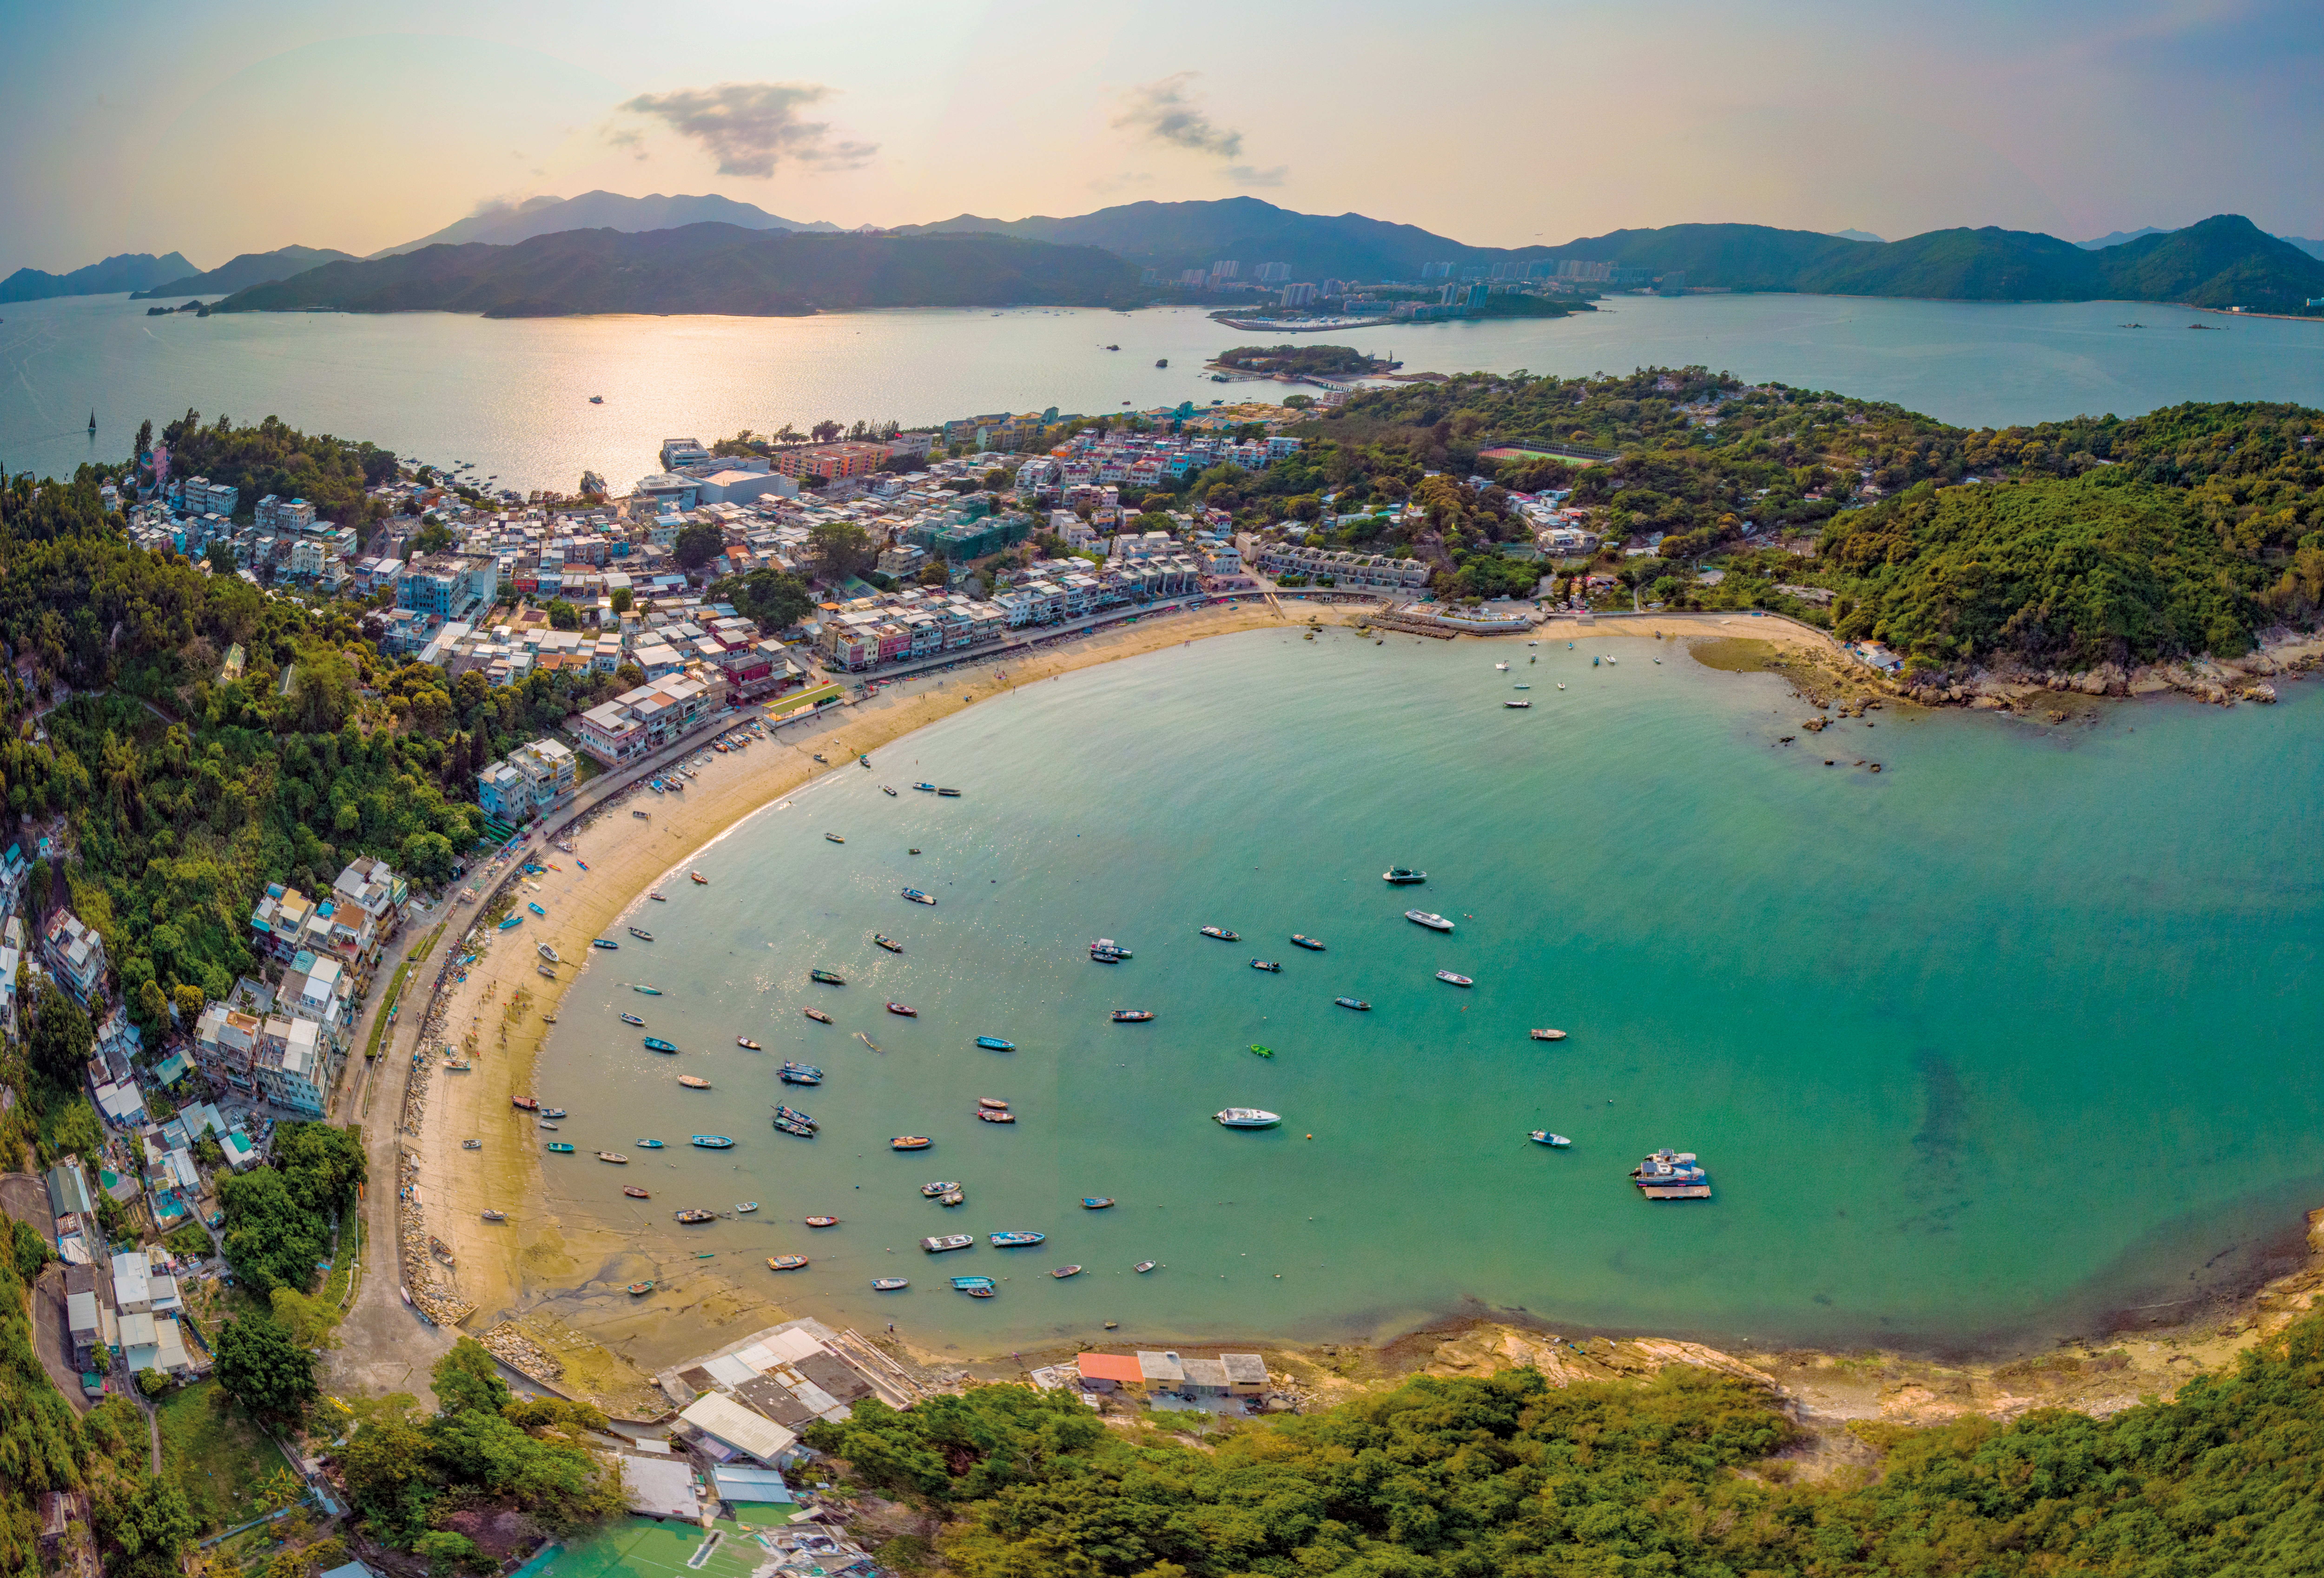 Peng Chau’s picturesque, C-shaped beach of Tung Wan Bay, is a popular spot among visitors – particularly Instagram enthusiasts.